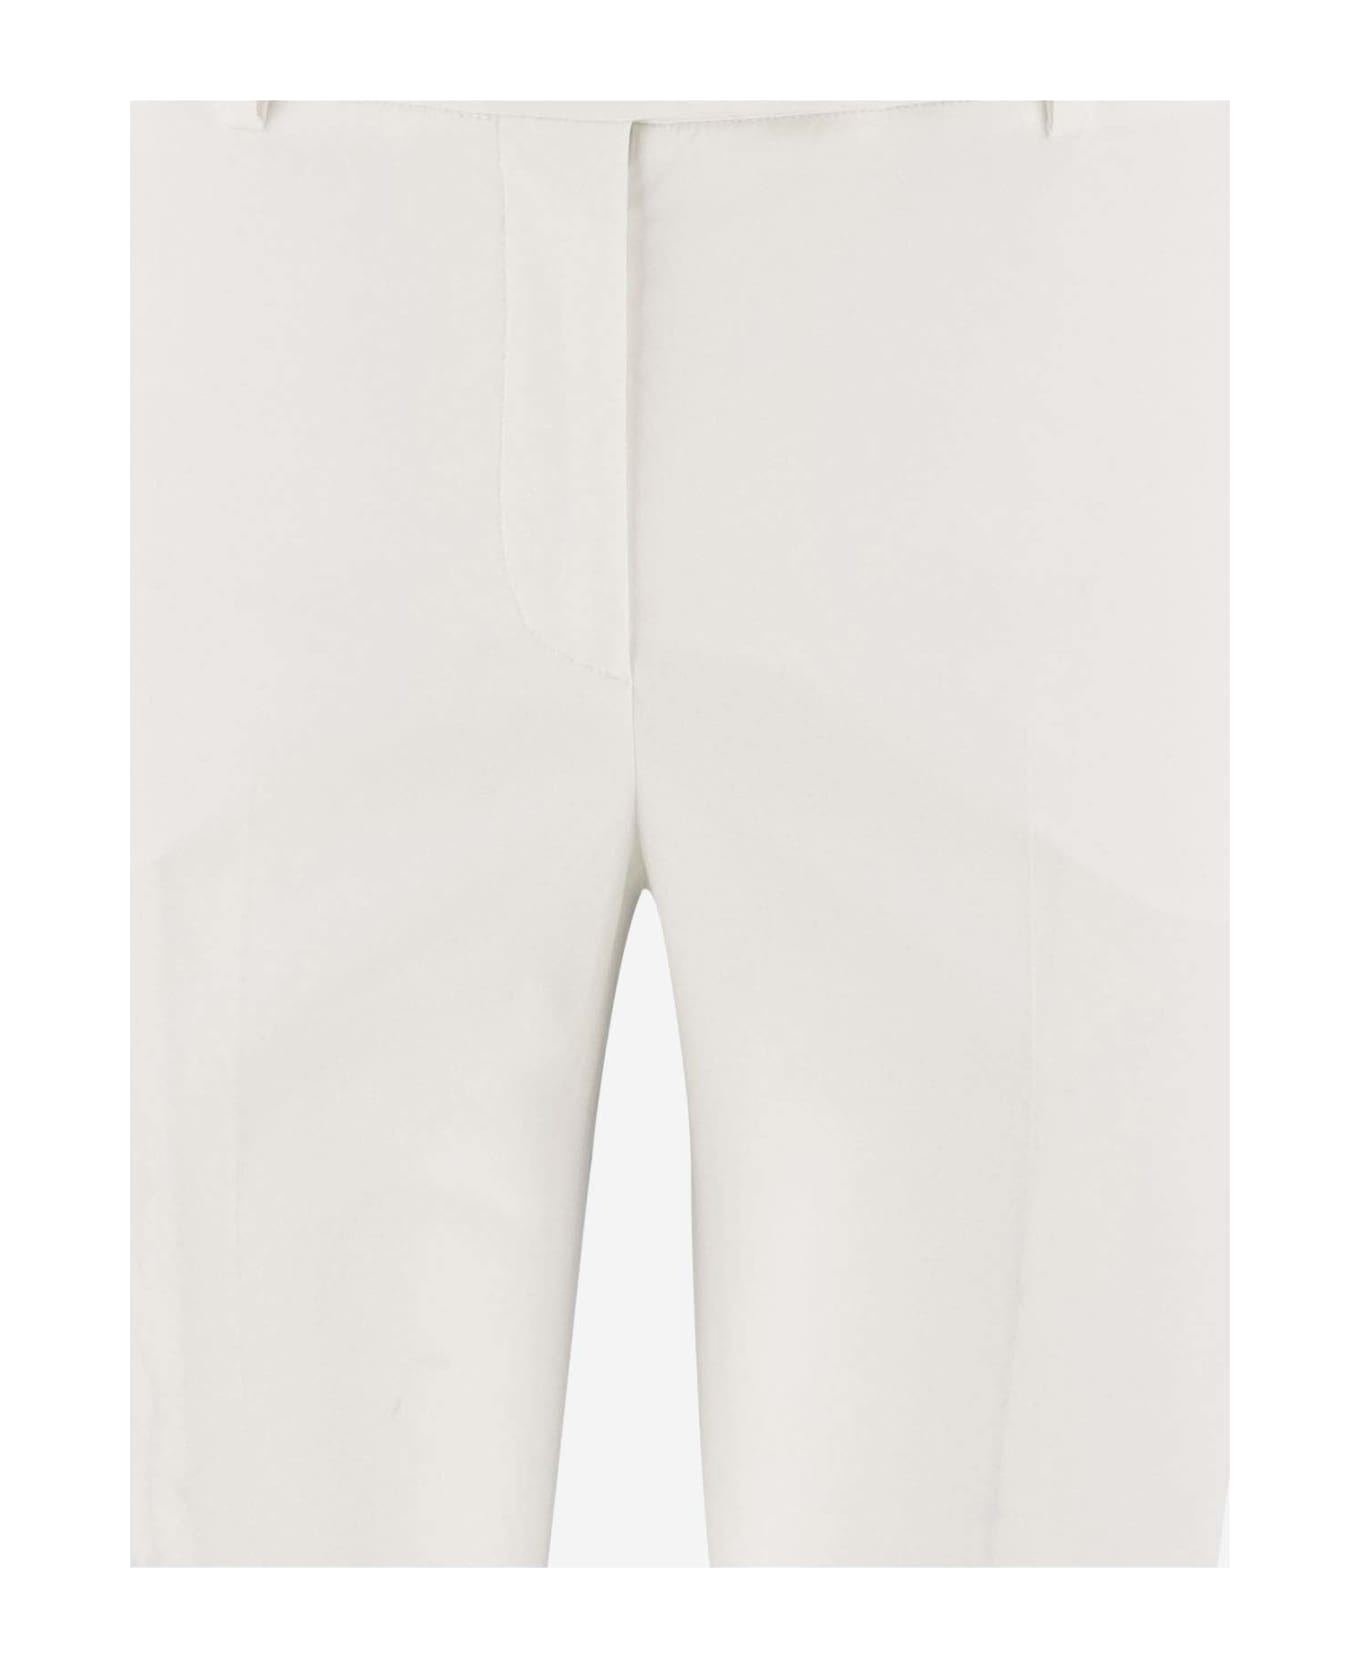 QL2 Stretch Cotton Flared Pants - White ボトムス